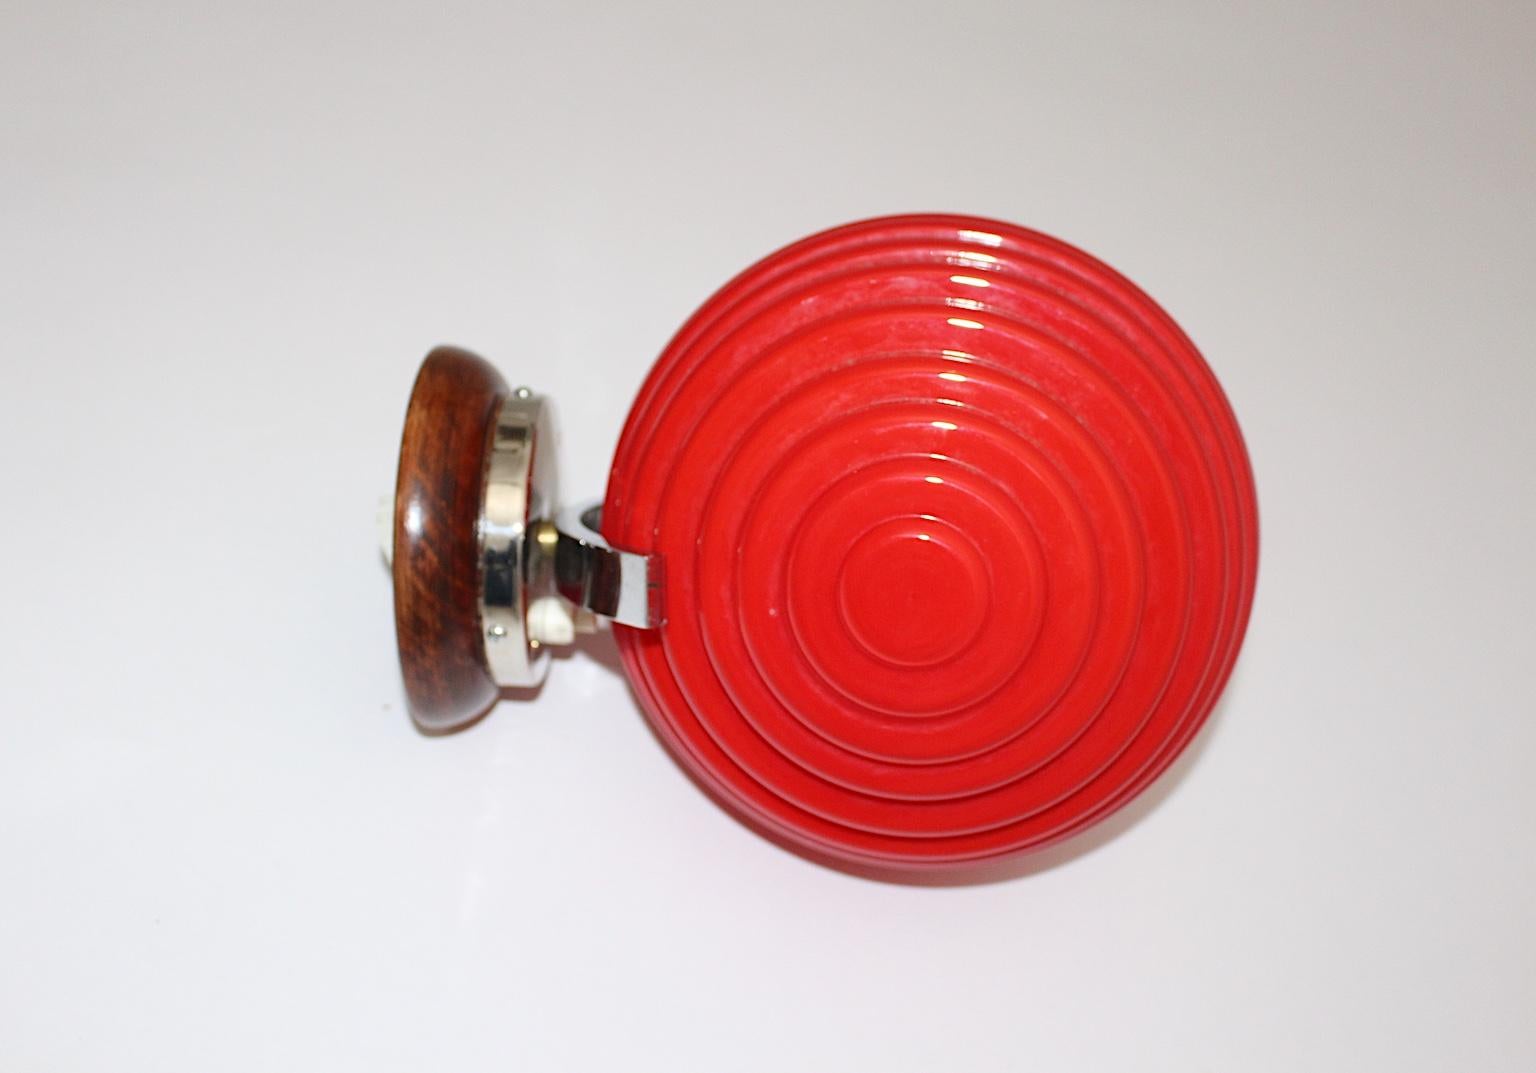 European Art Deco Vintage Chromed Metal Sconce with Red Glass Lamp Shade 1920s Austria For Sale